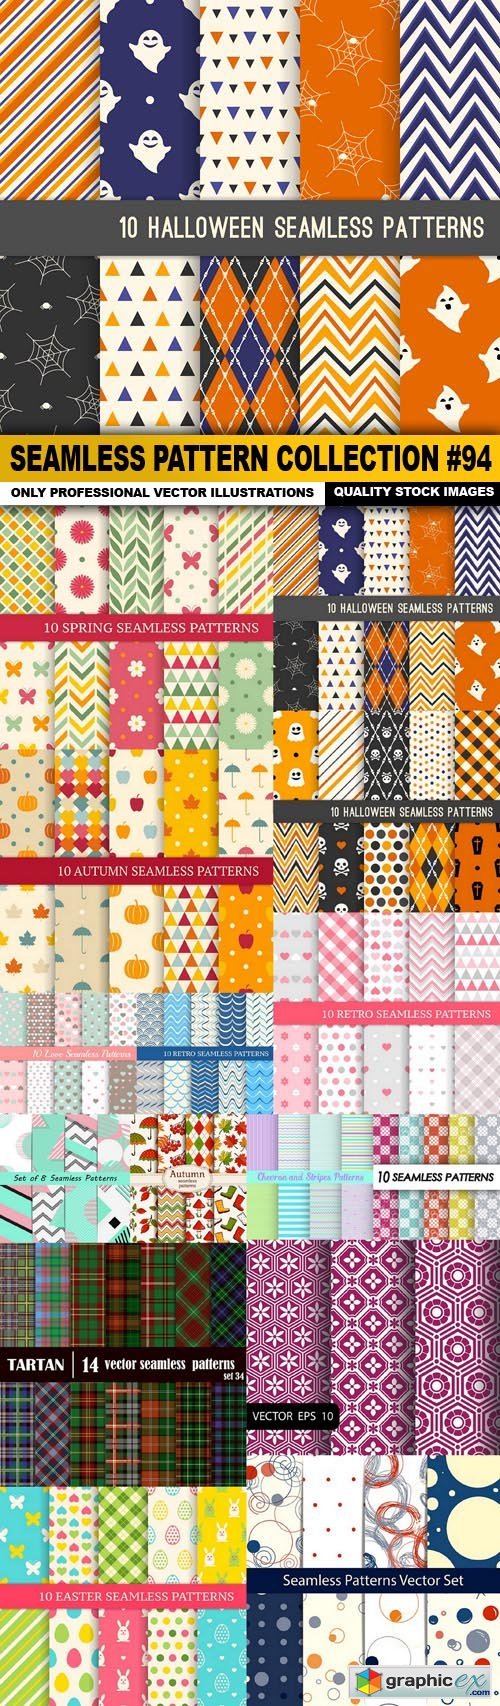 Seamless Pattern Collection #94 - 15 Vector